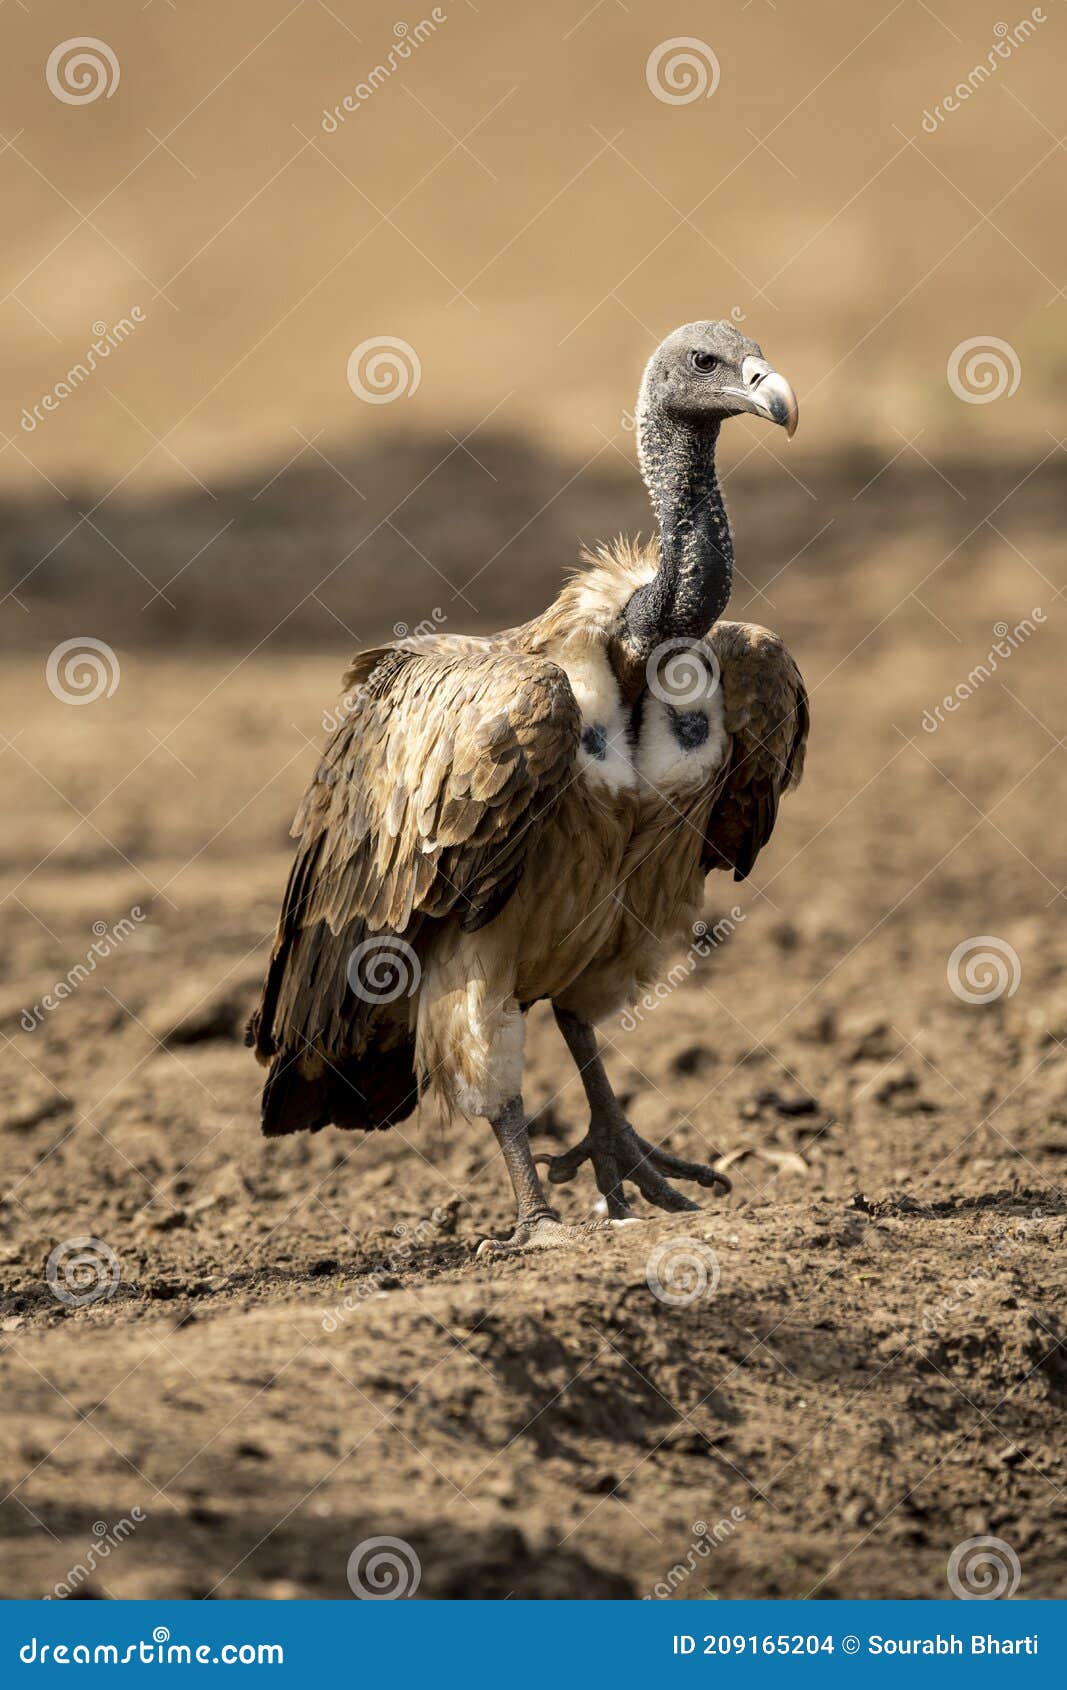 Long Billed Vulture or Gyps Indicus Portrait a Critically Endangered  Vulture Species at Ranthambore National Park or Tiger Reserve Stock Photo -  Image of satpura, panna: 209165204